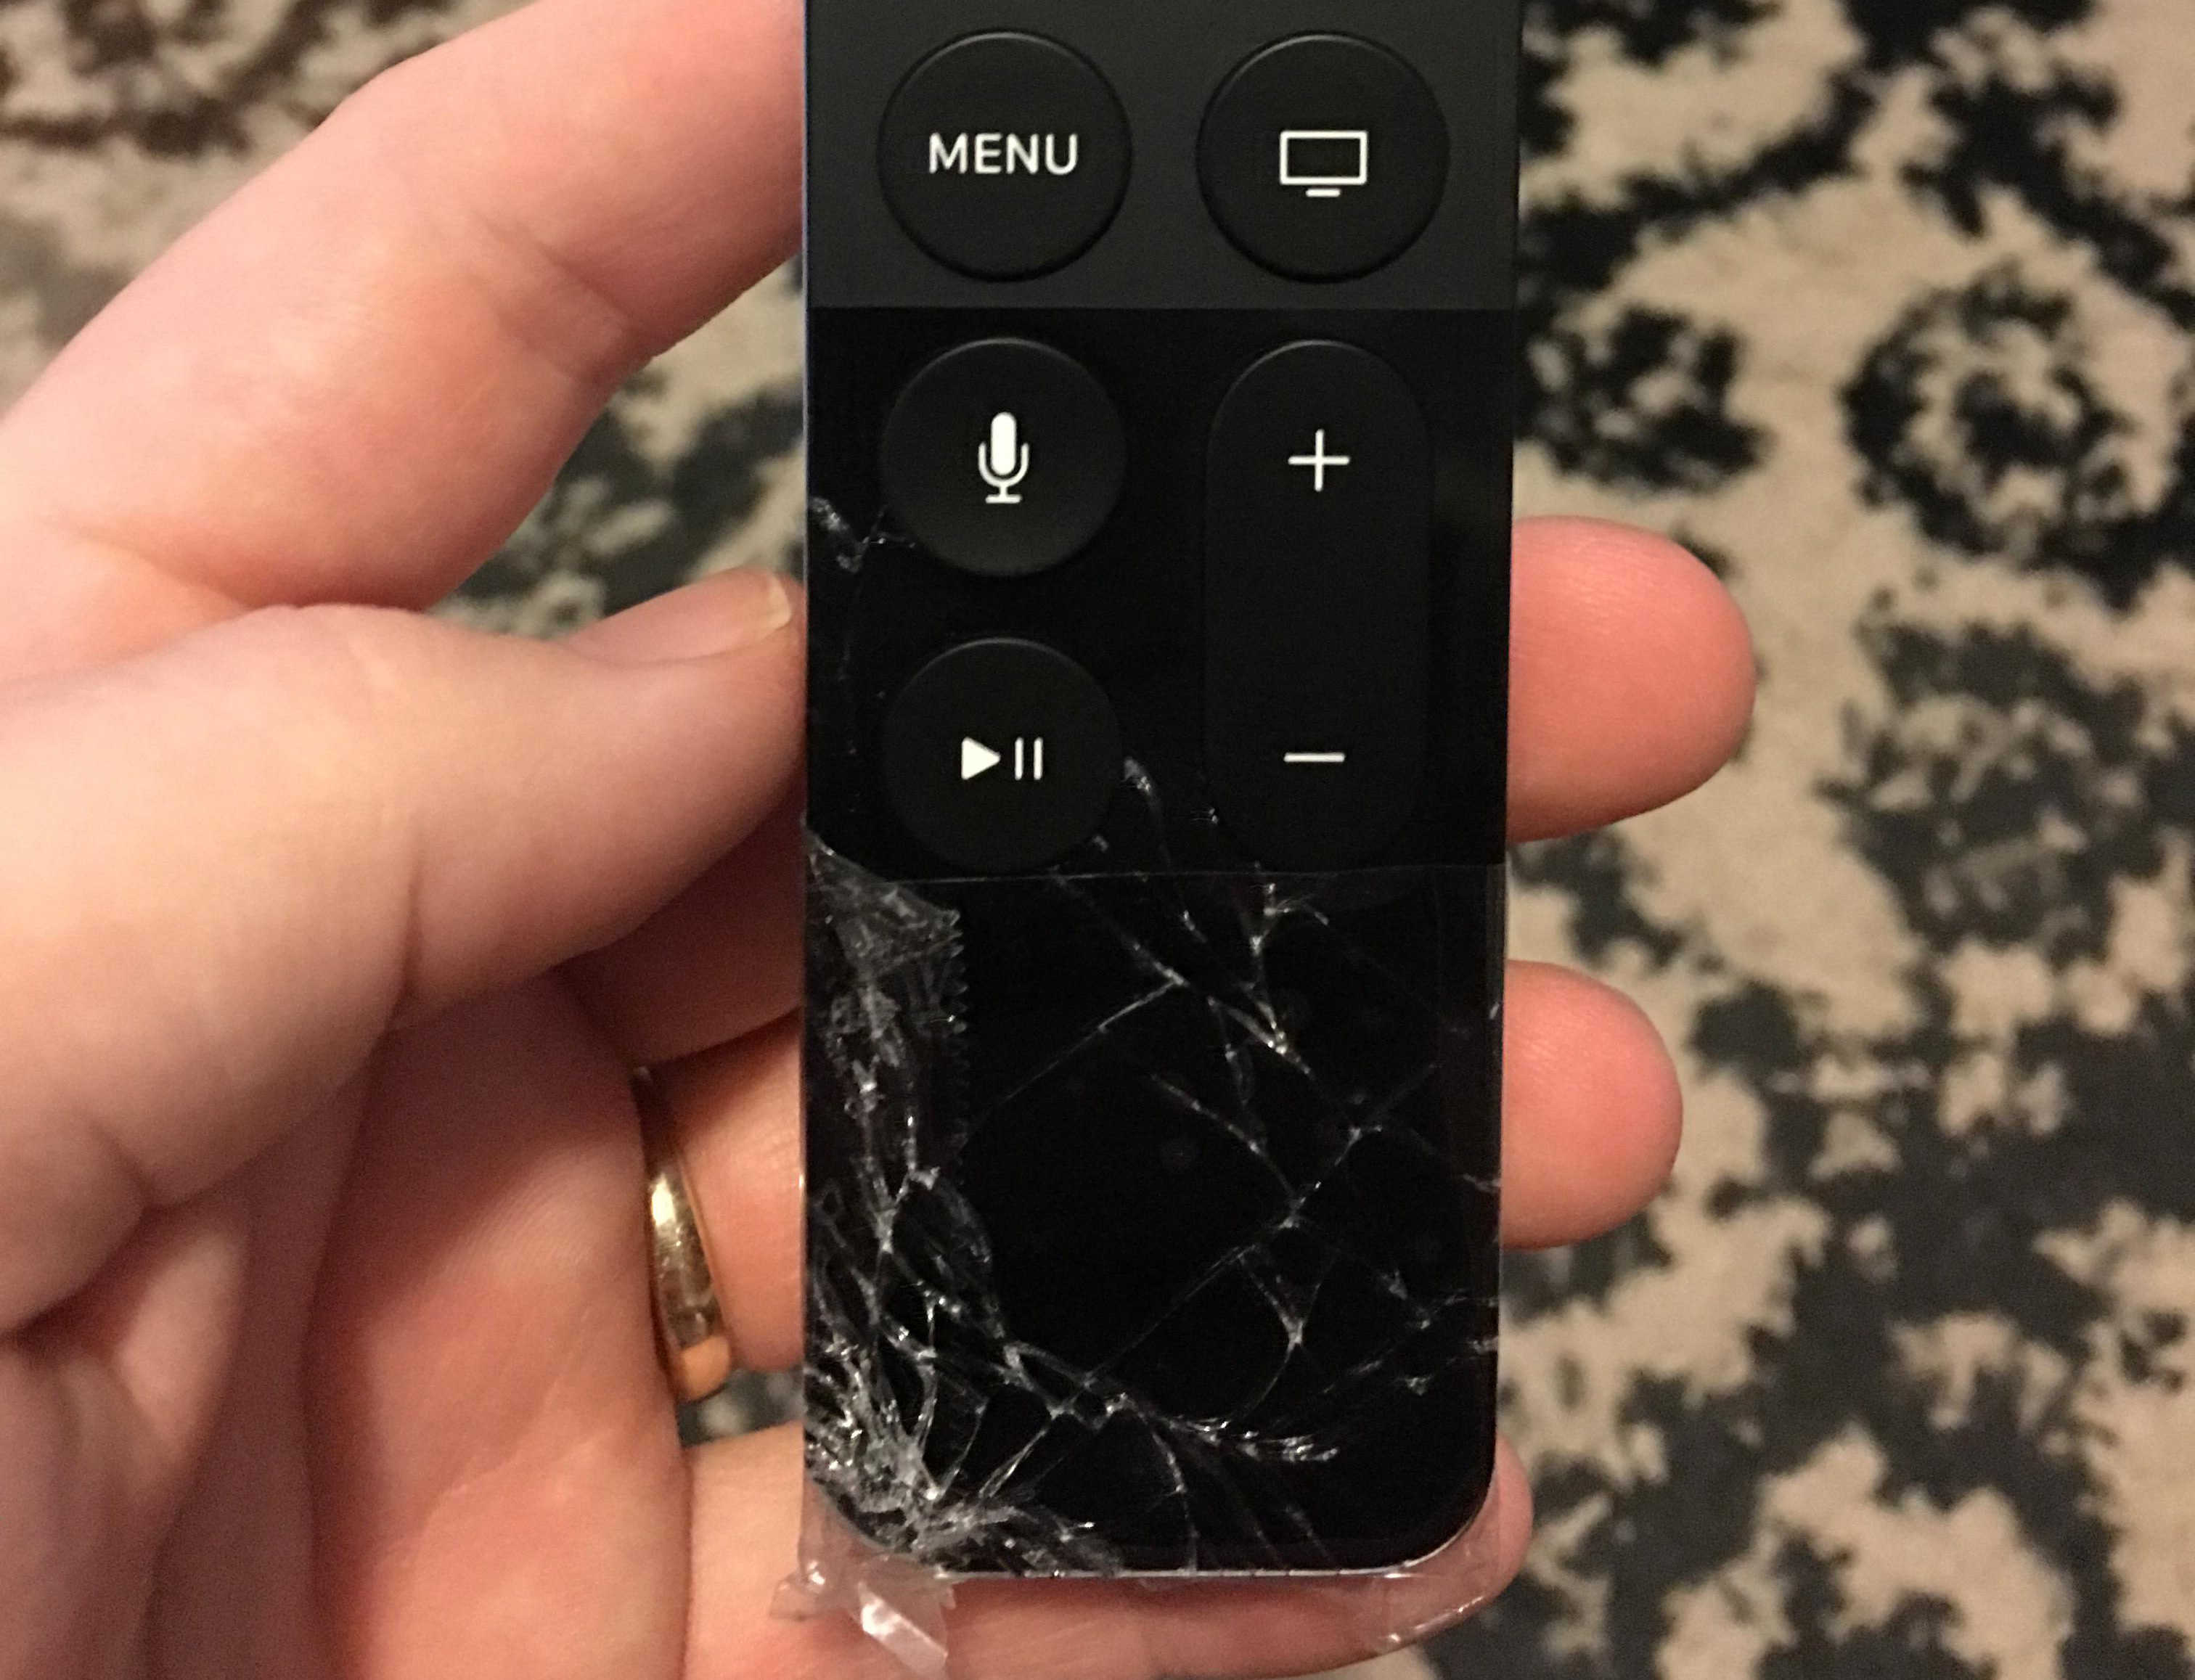 Careful with that new Apple TV remote, mister!